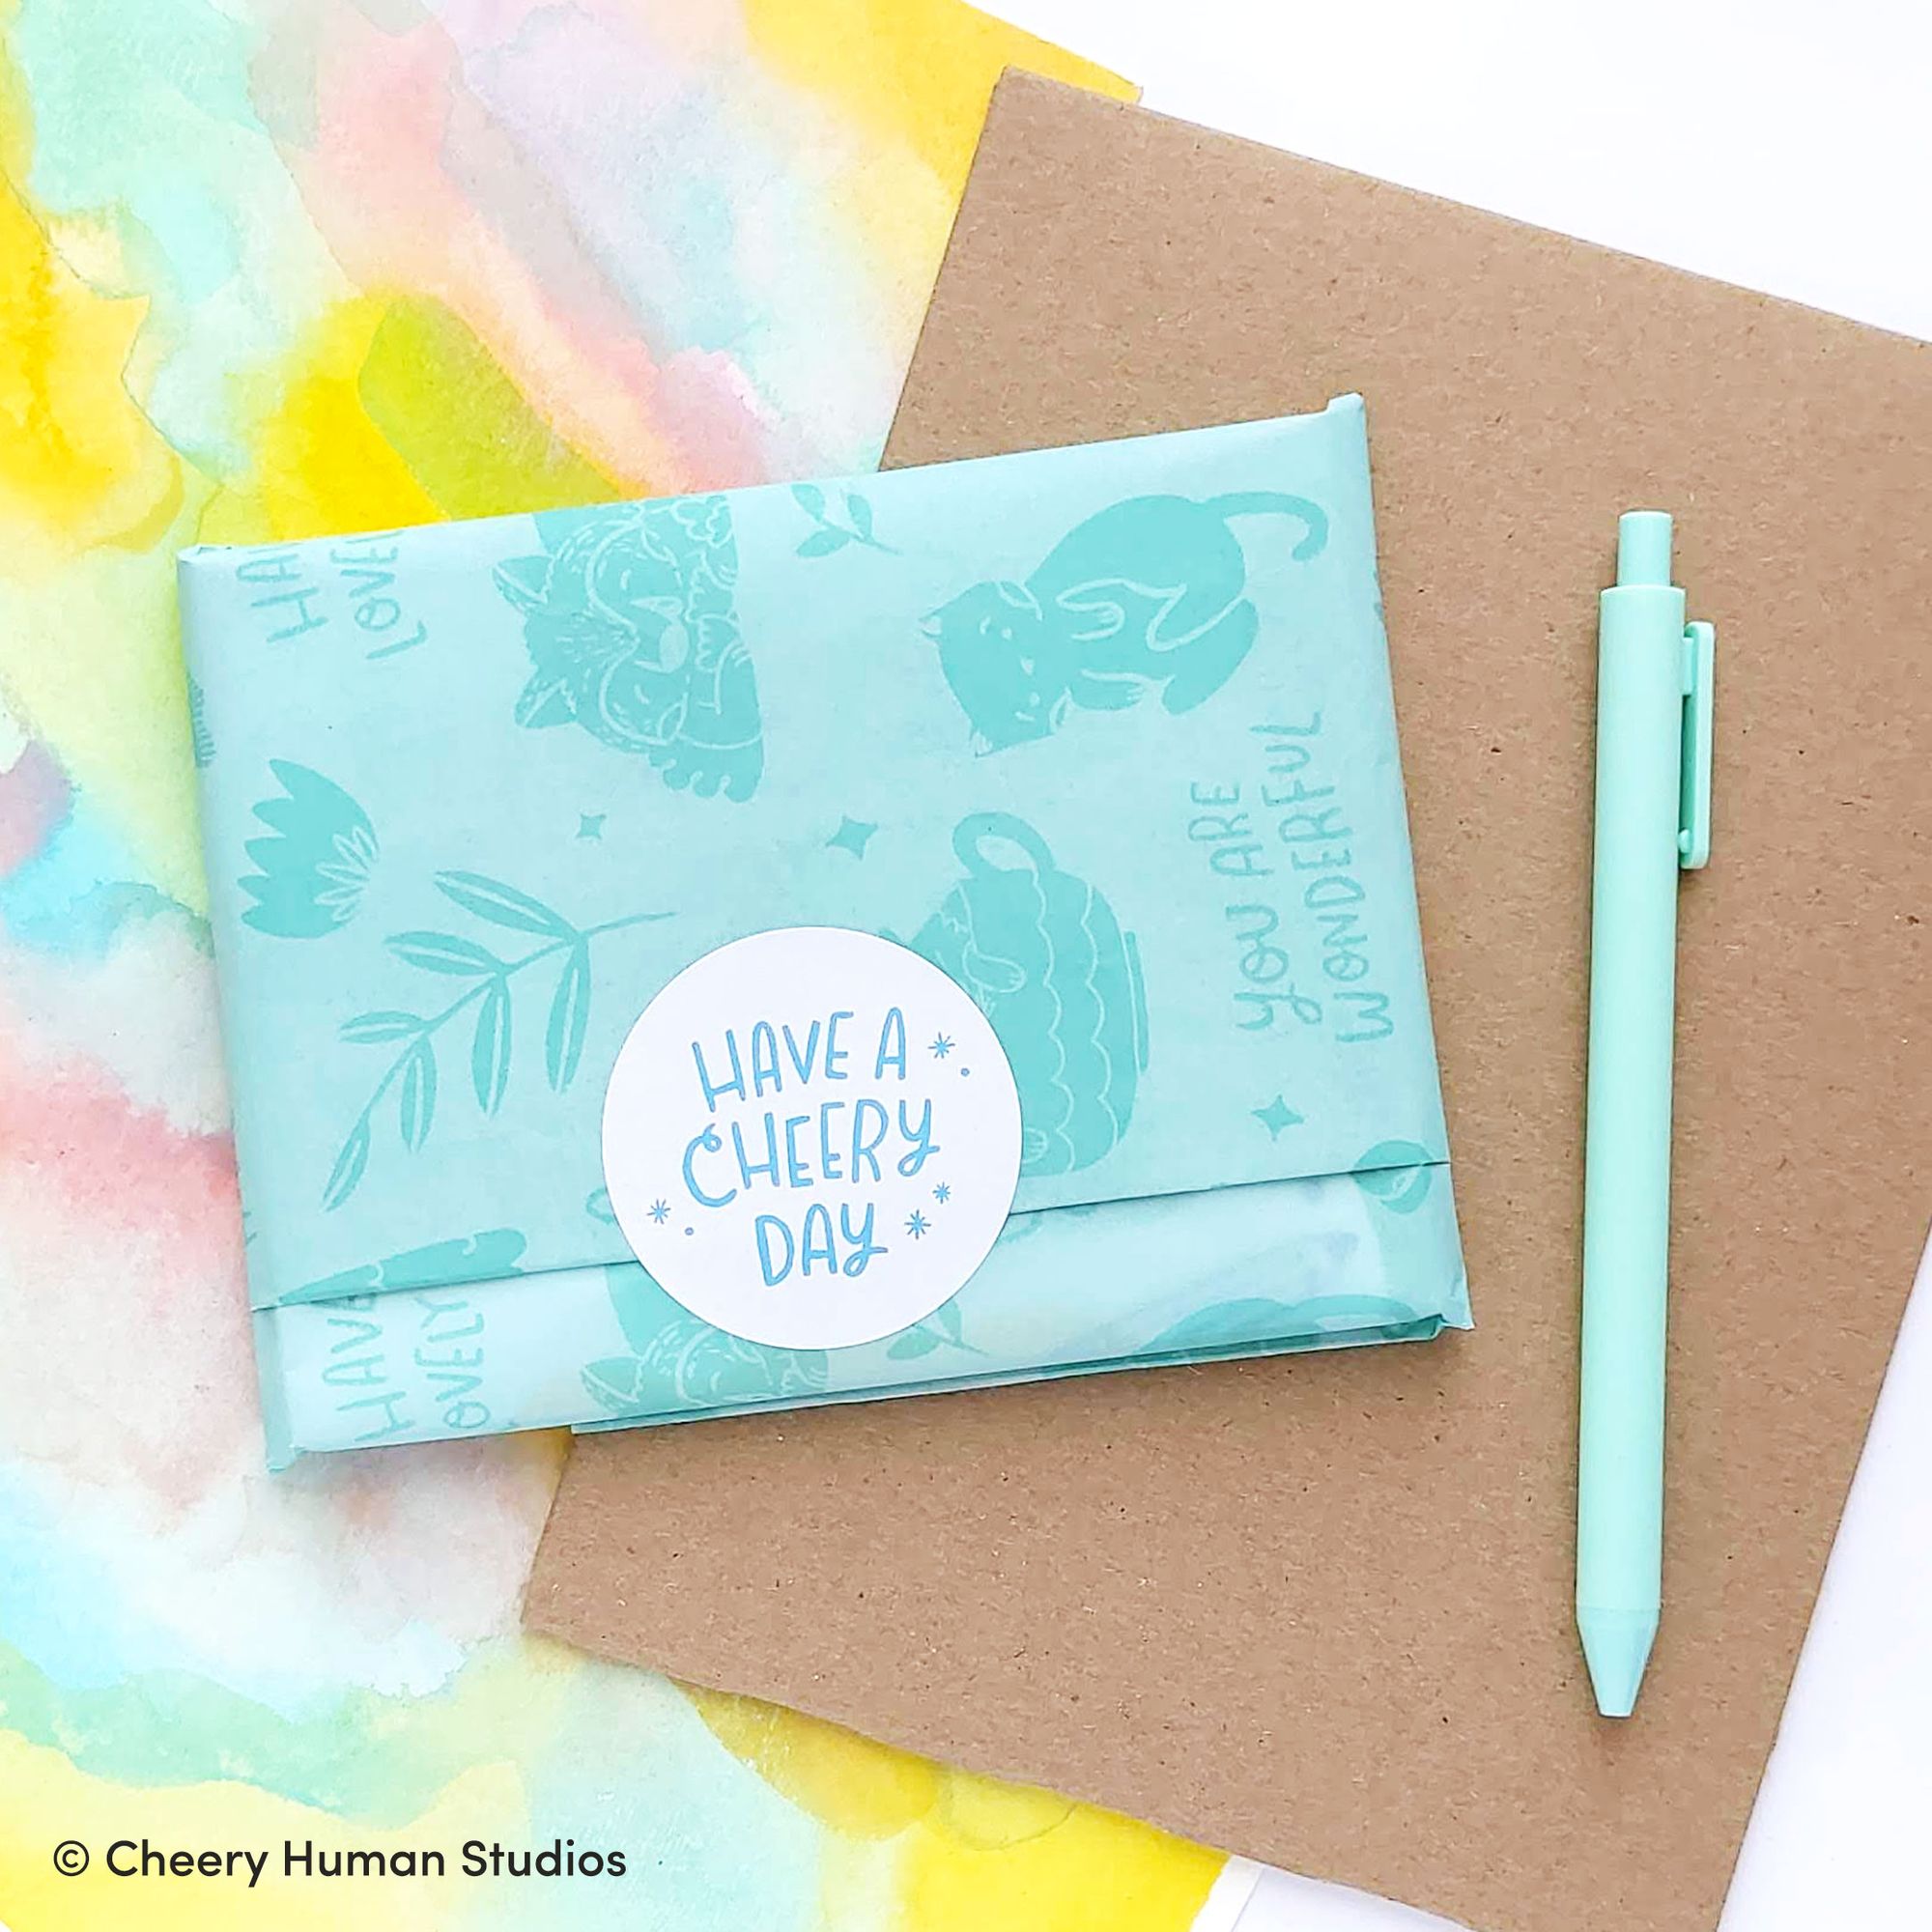 Cheery Human Studios: Making People’s Days with Encouraging Art and Sustainable Practices